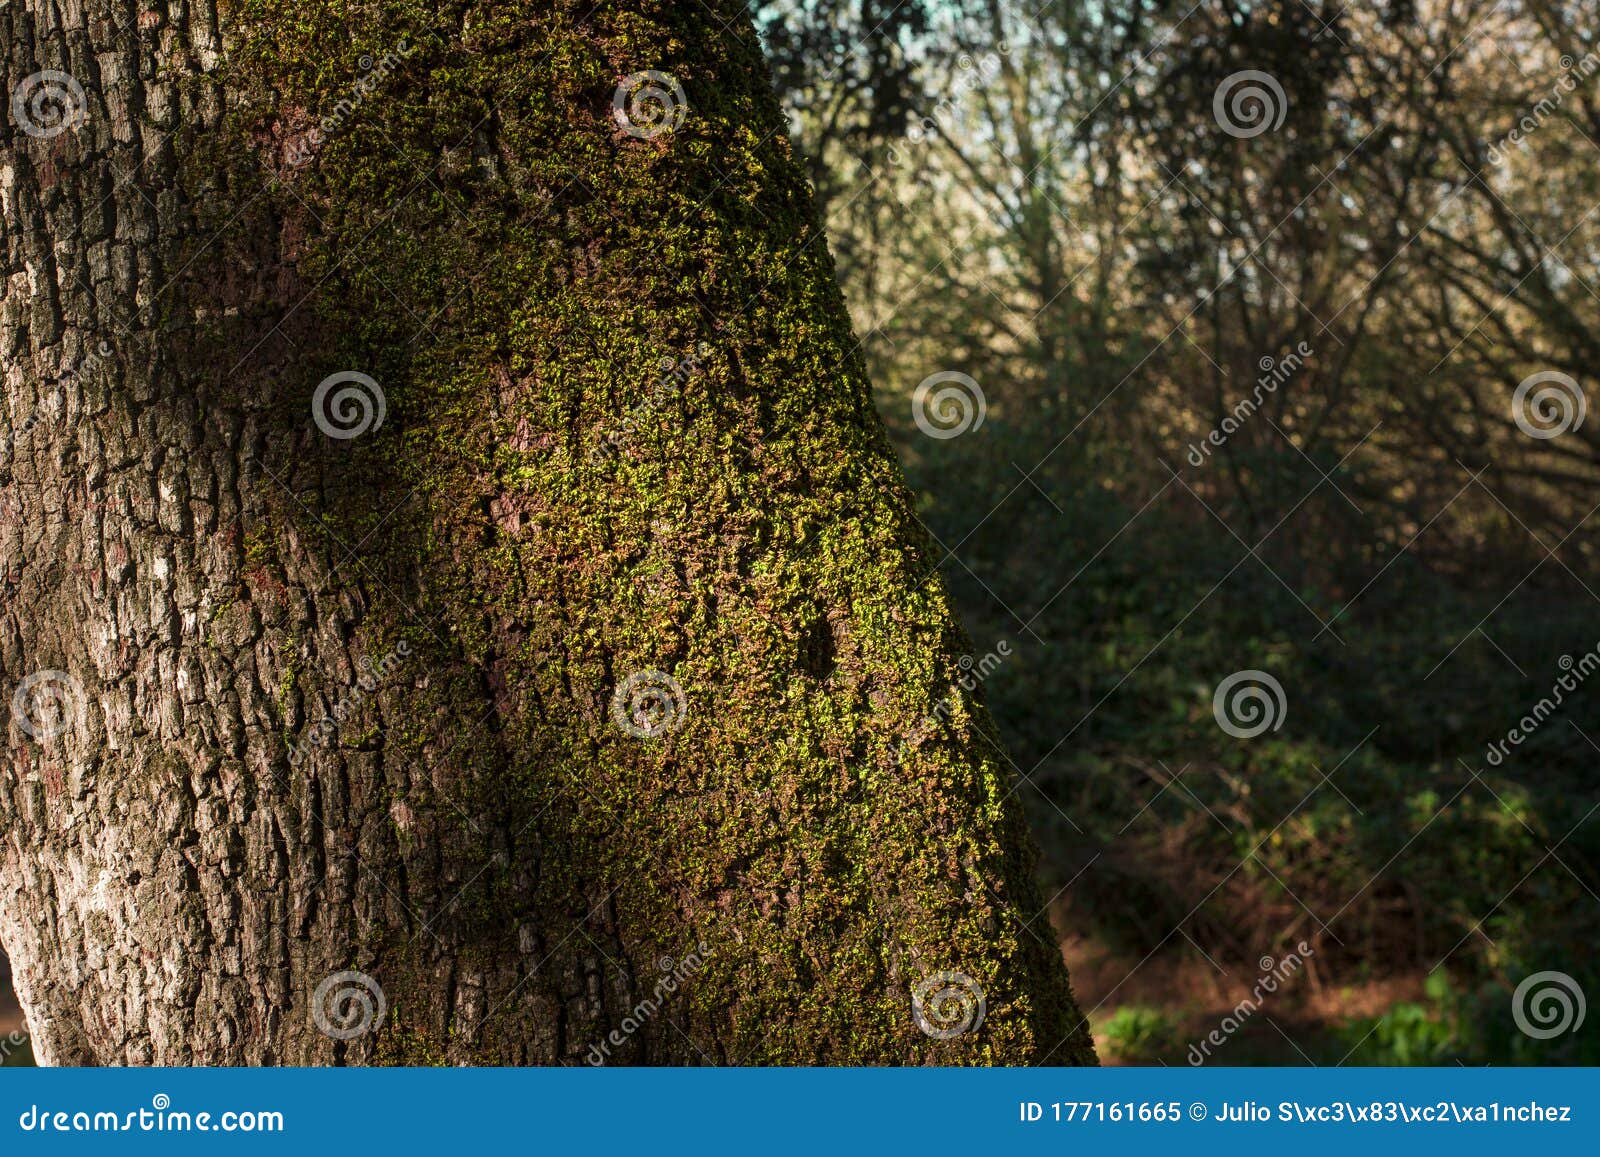 millenial tree texture in a lush forest